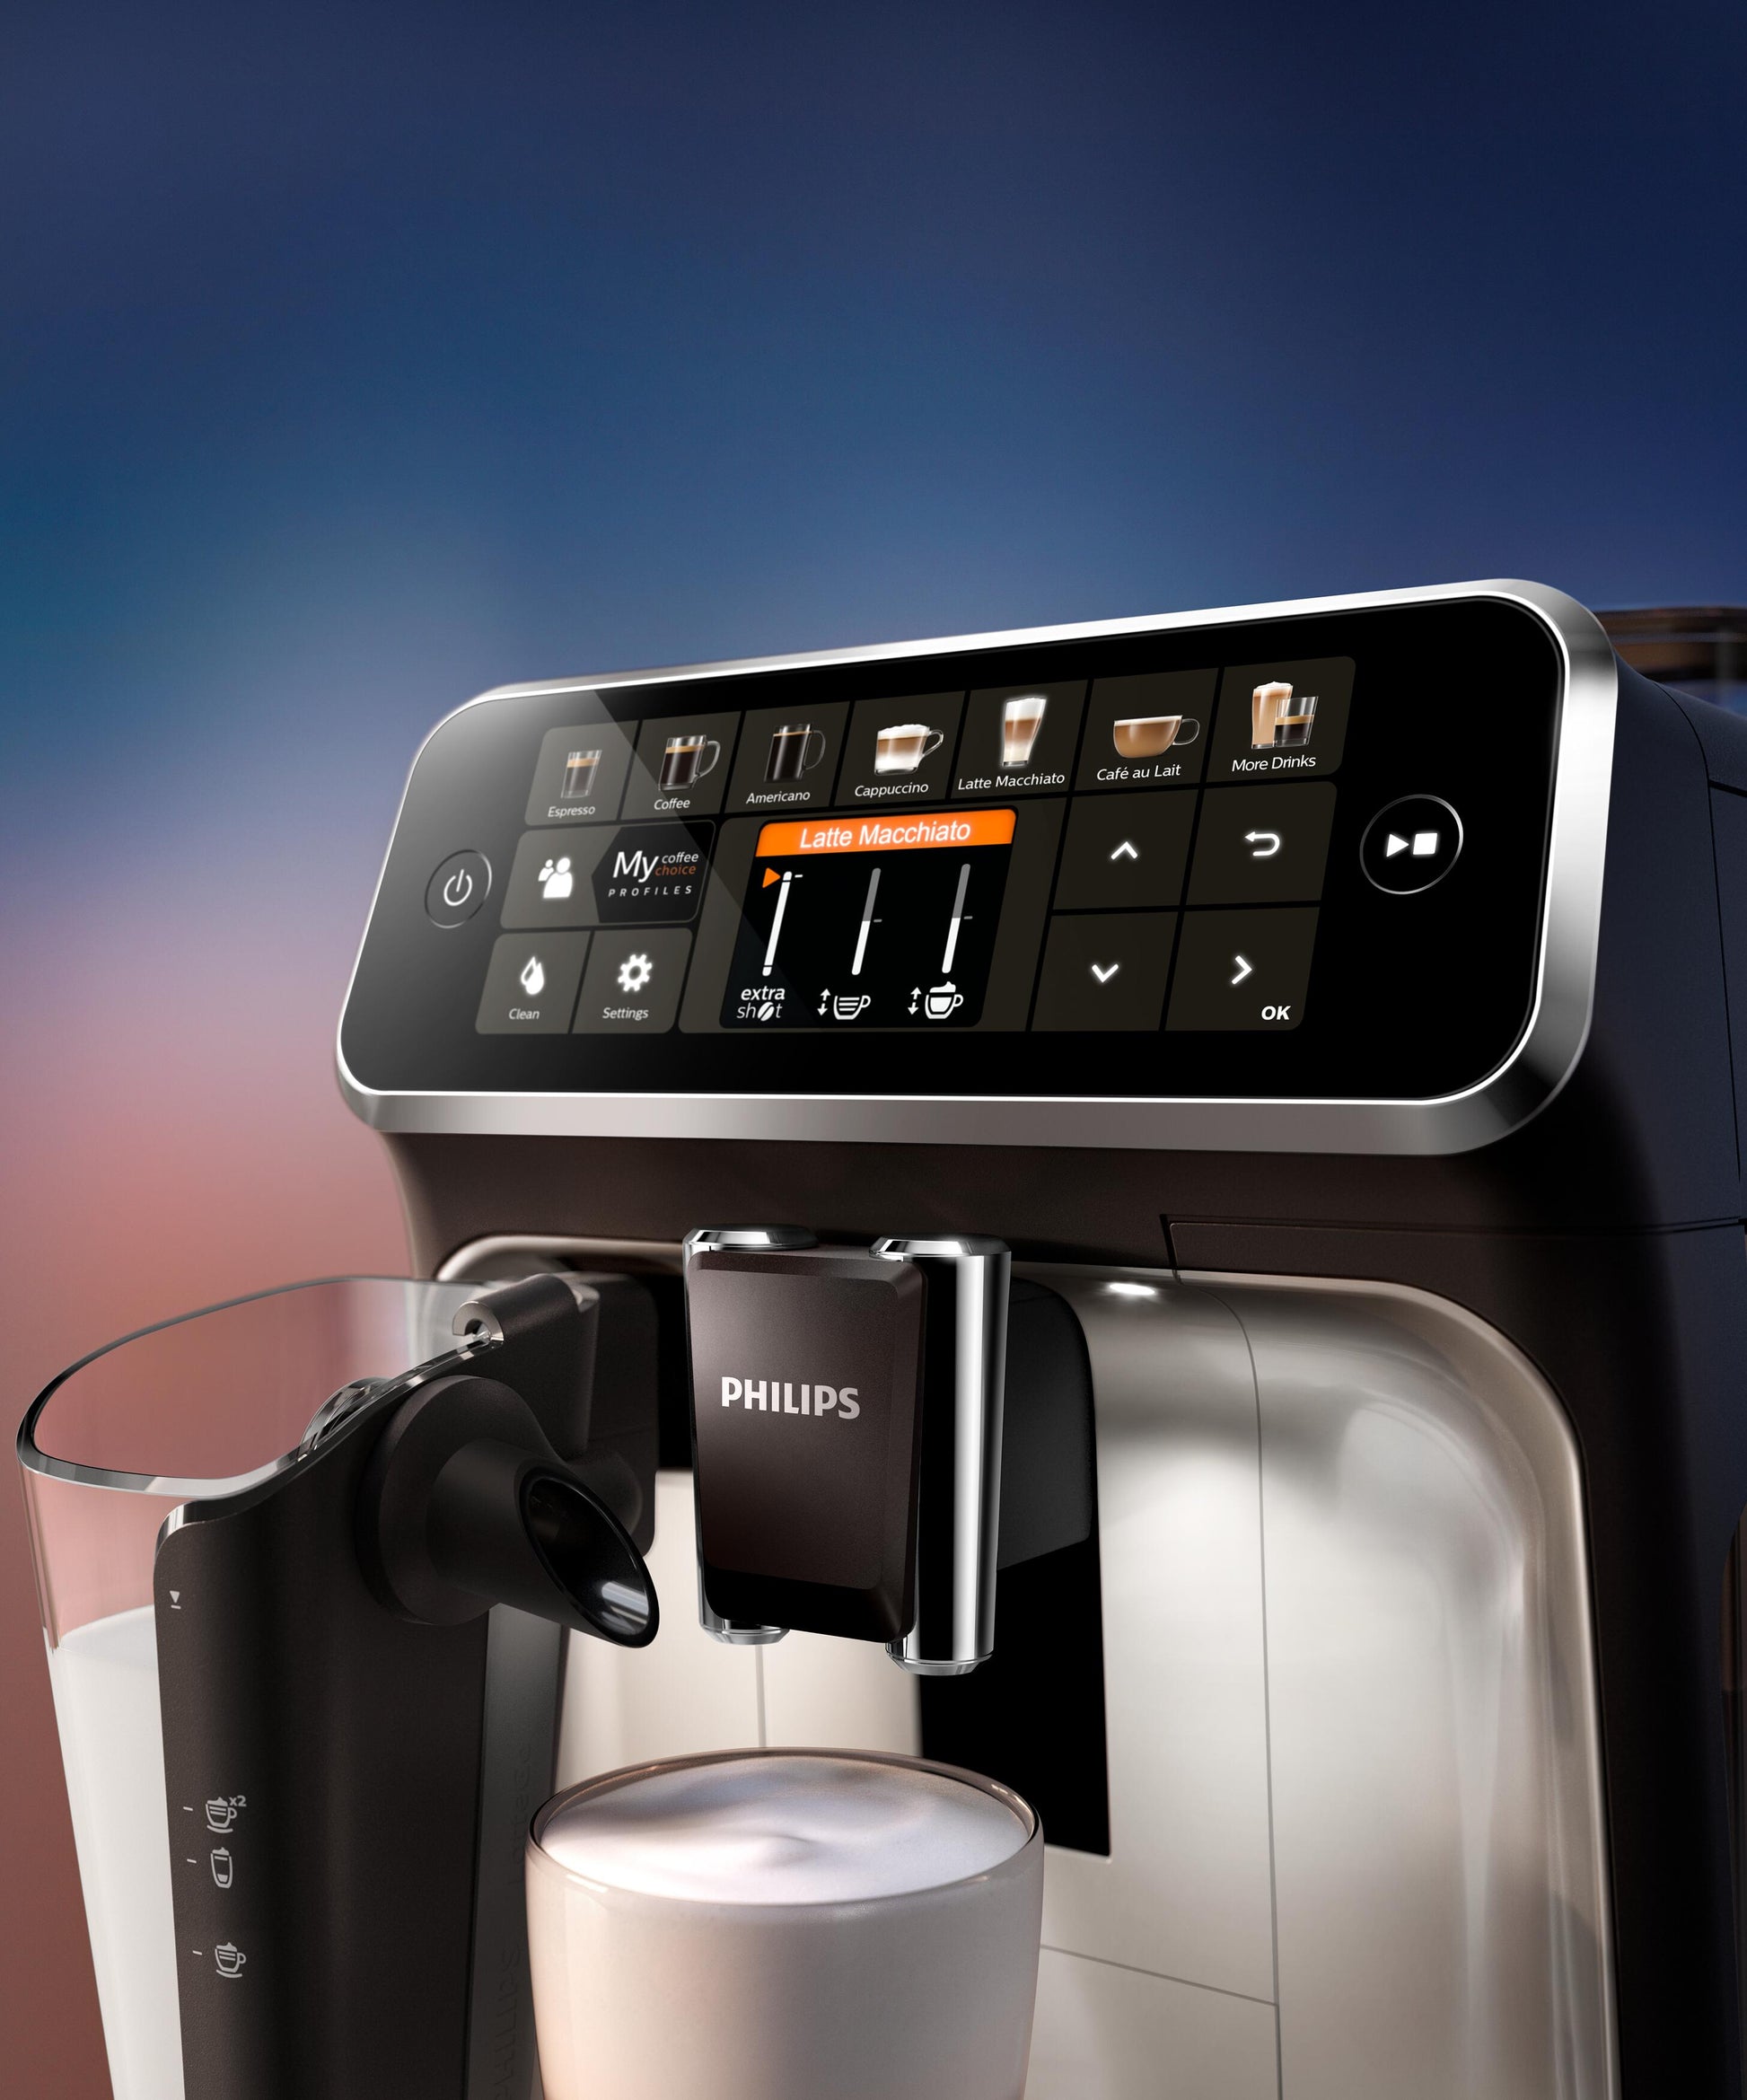 Philips 5400 Series Fully Automatic Espresso Machine - LatteGo – Home  Appliances Philips